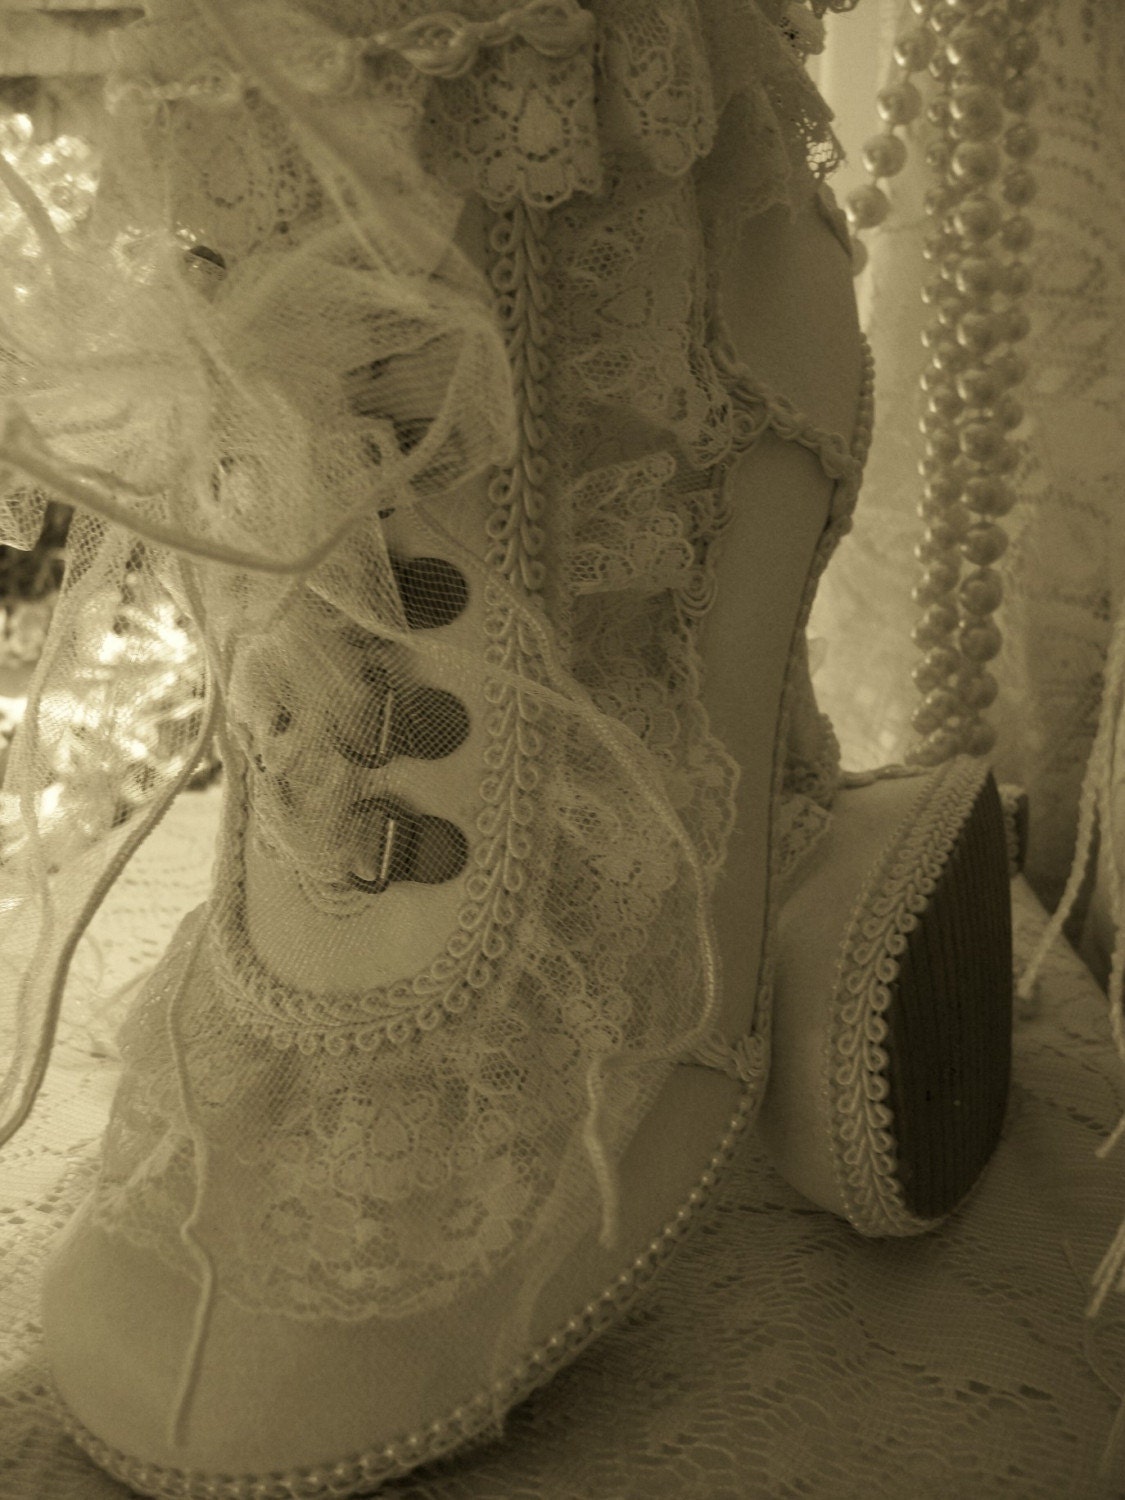 Victorian Steampunk Ivory Wedding Boots Lace Pearls More Repurposed